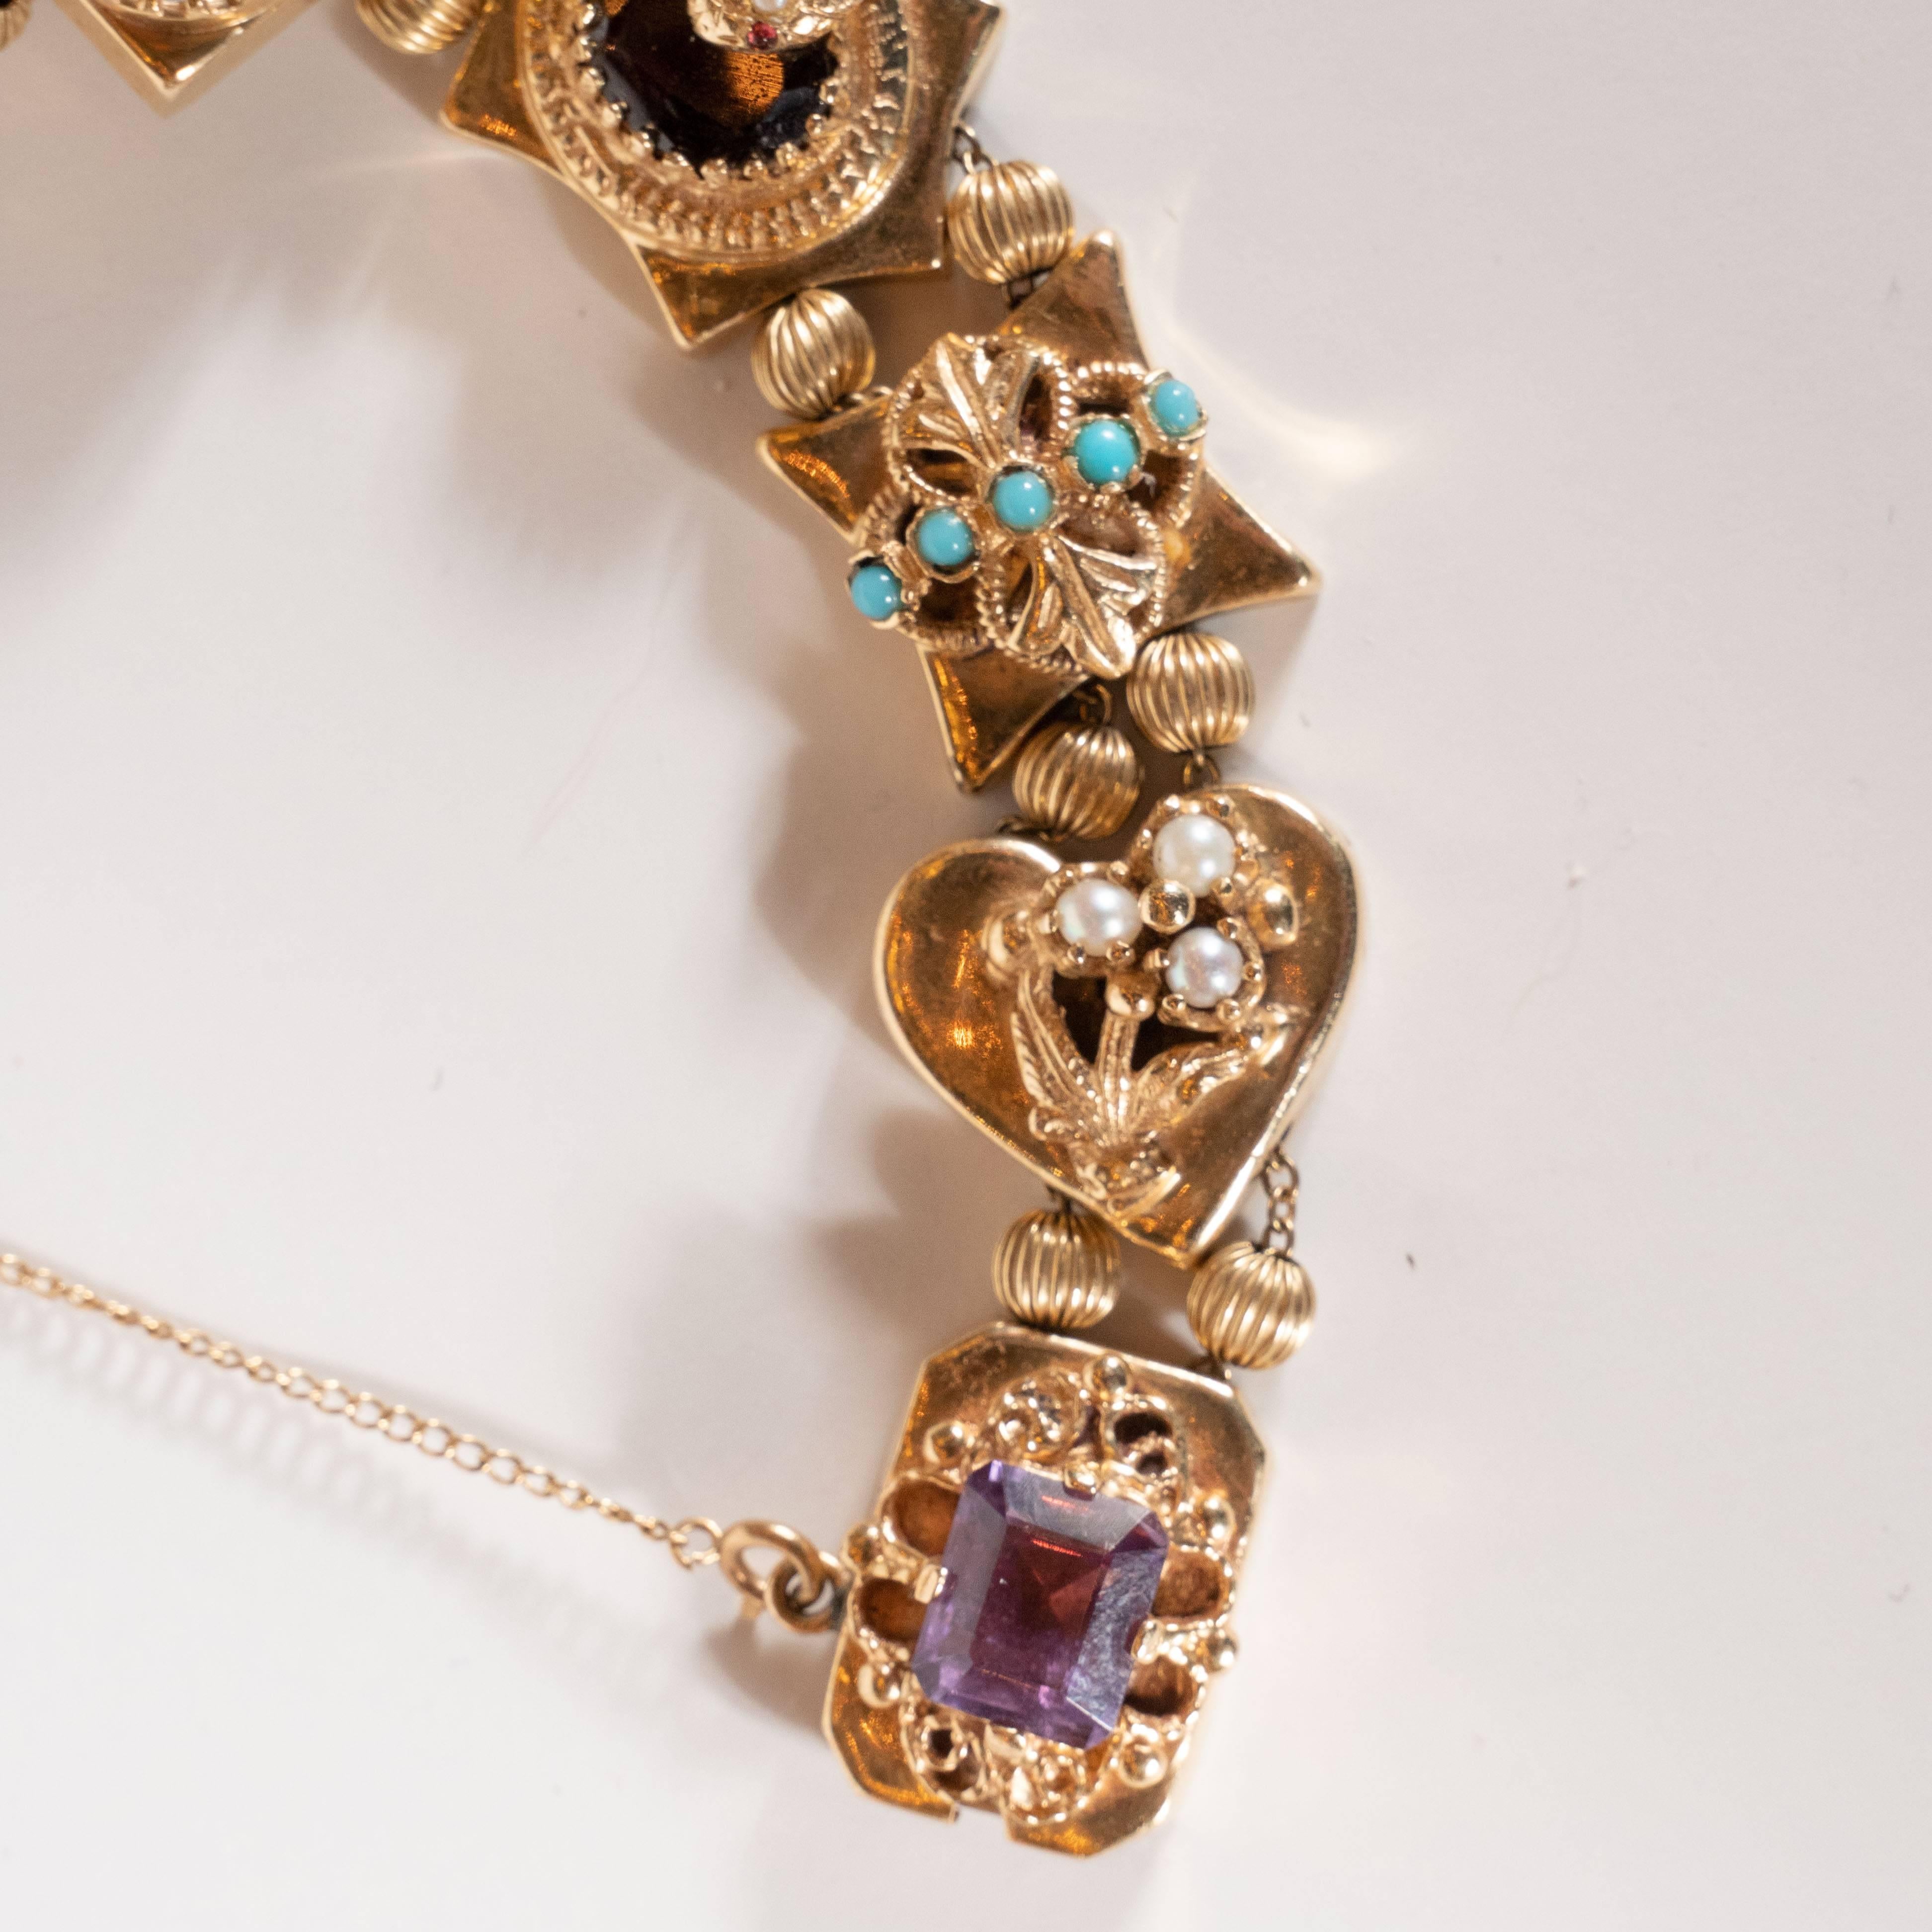 1940s Gold Slide Bracelet with Citrine, Sapphire, Rubies, Garnets and Pearls 2